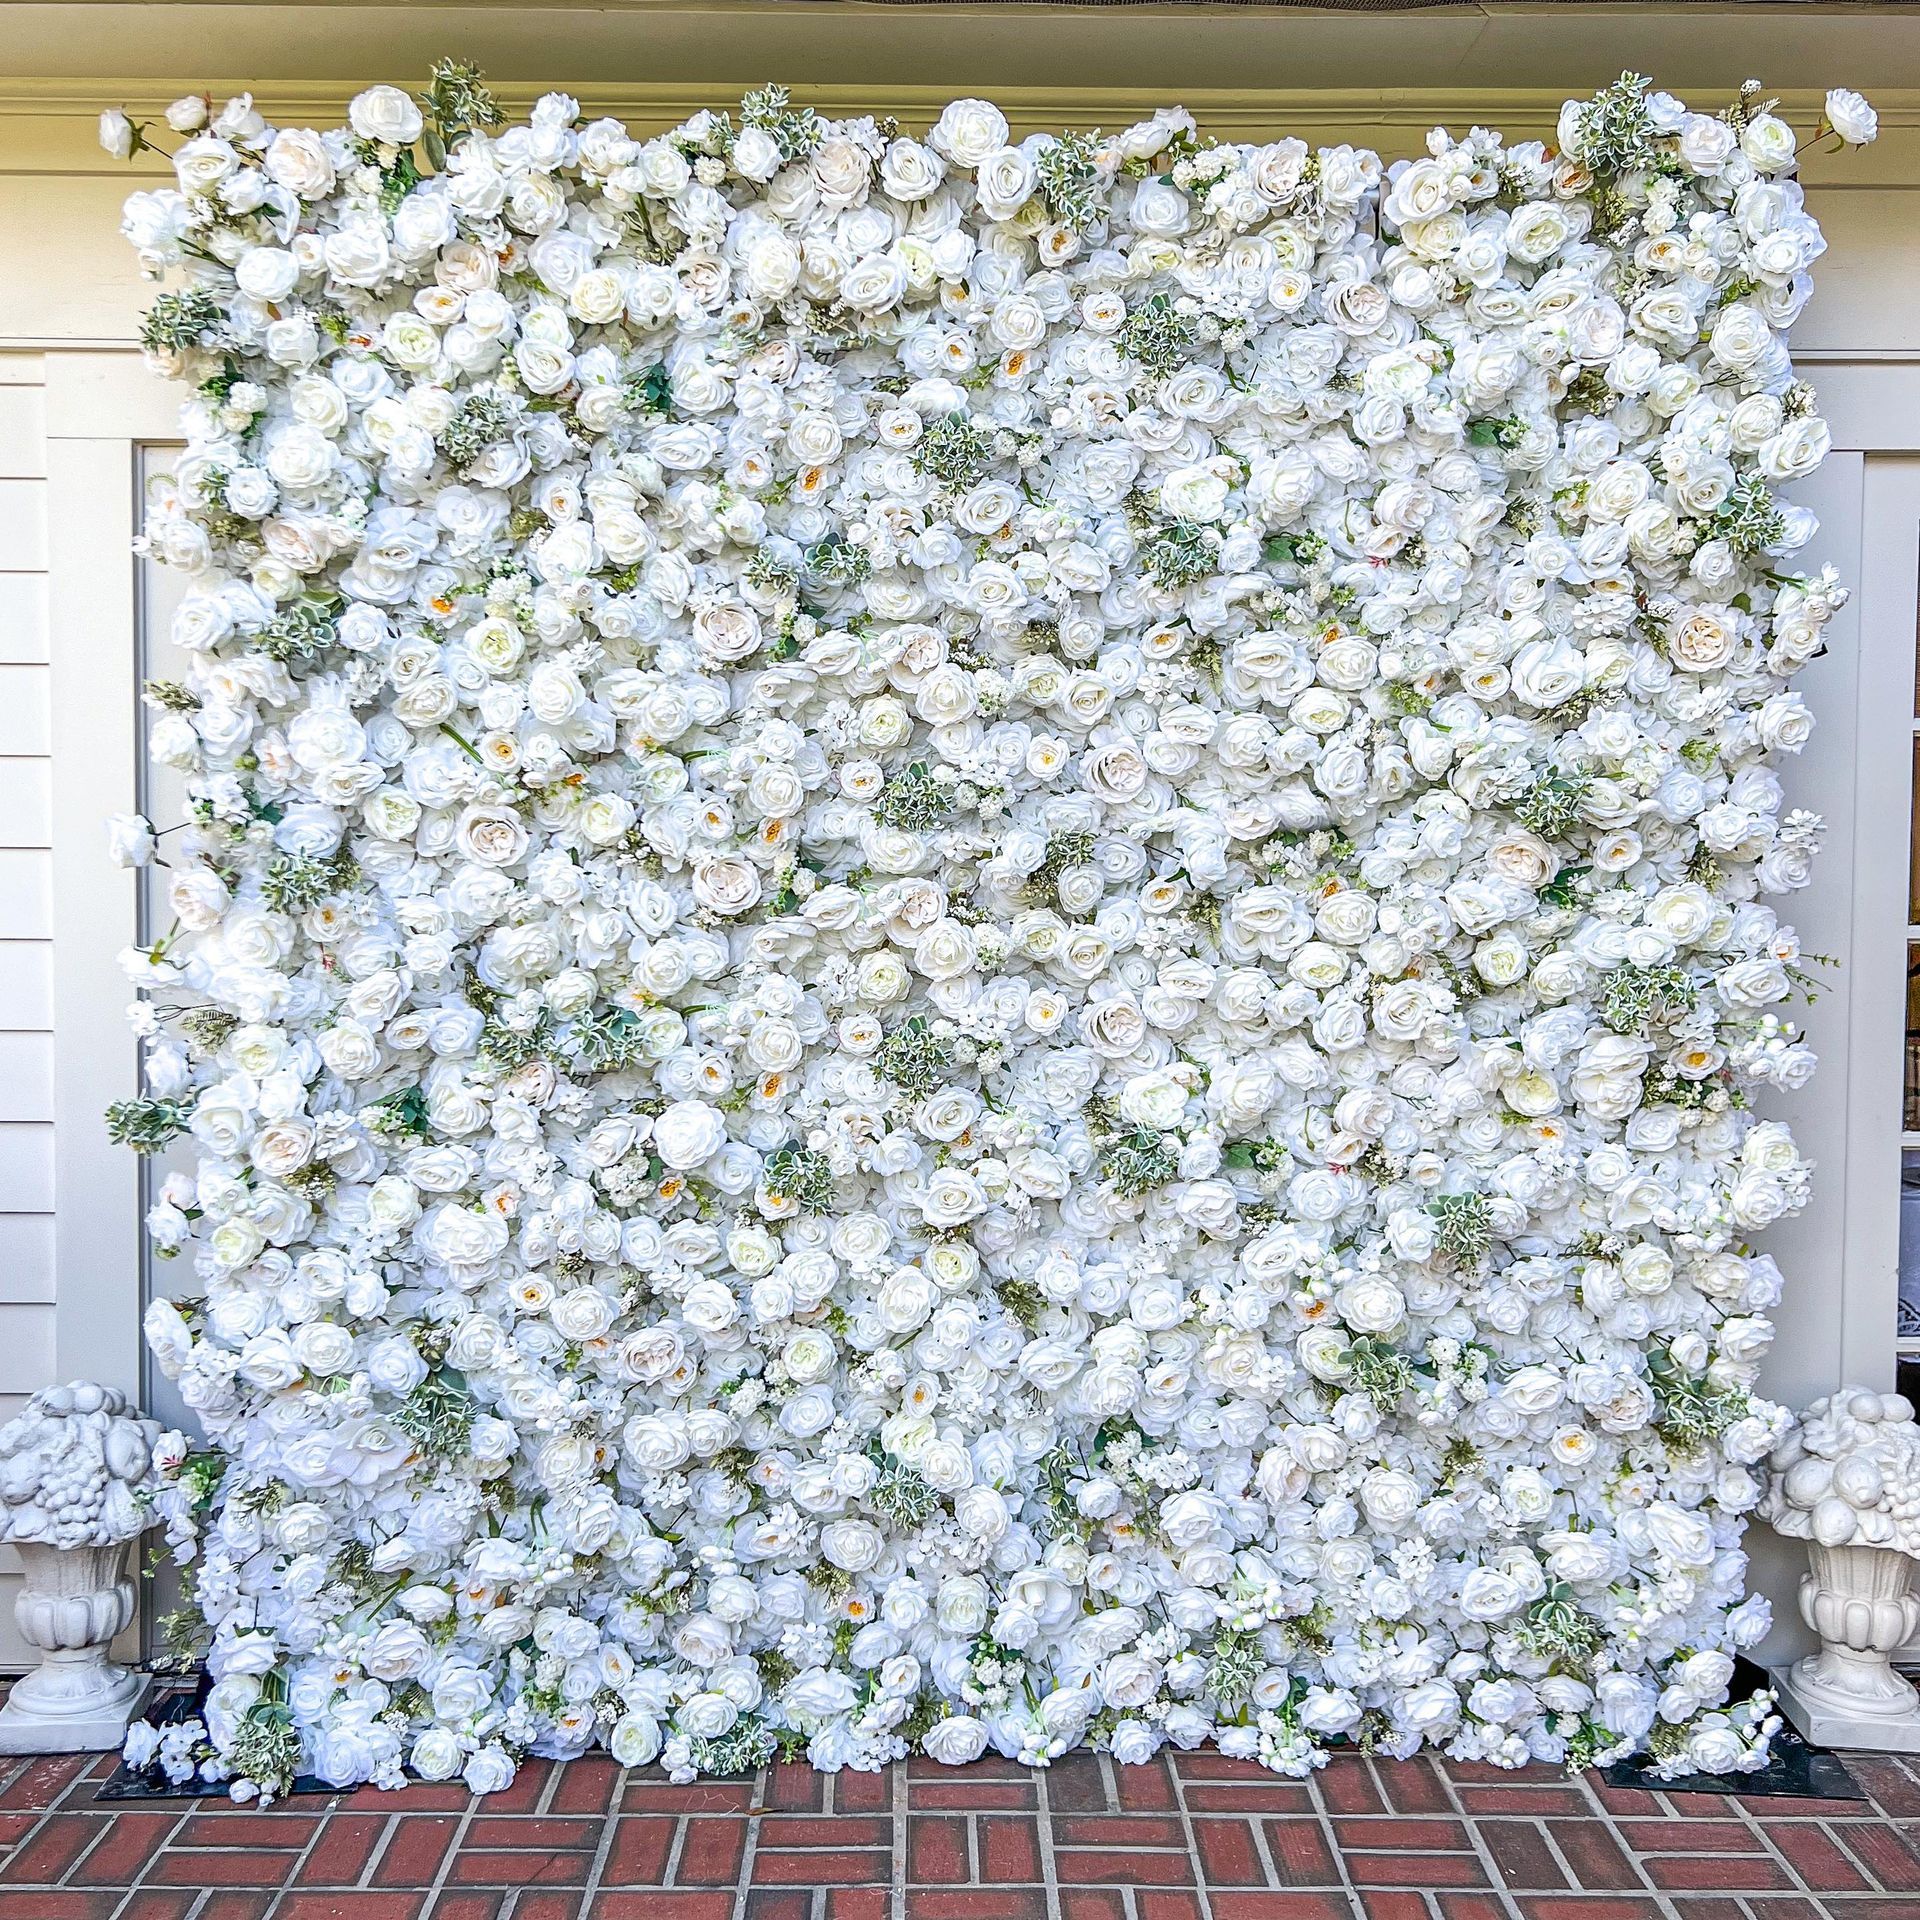 a wall of white flowers is sitting on a brick floor .